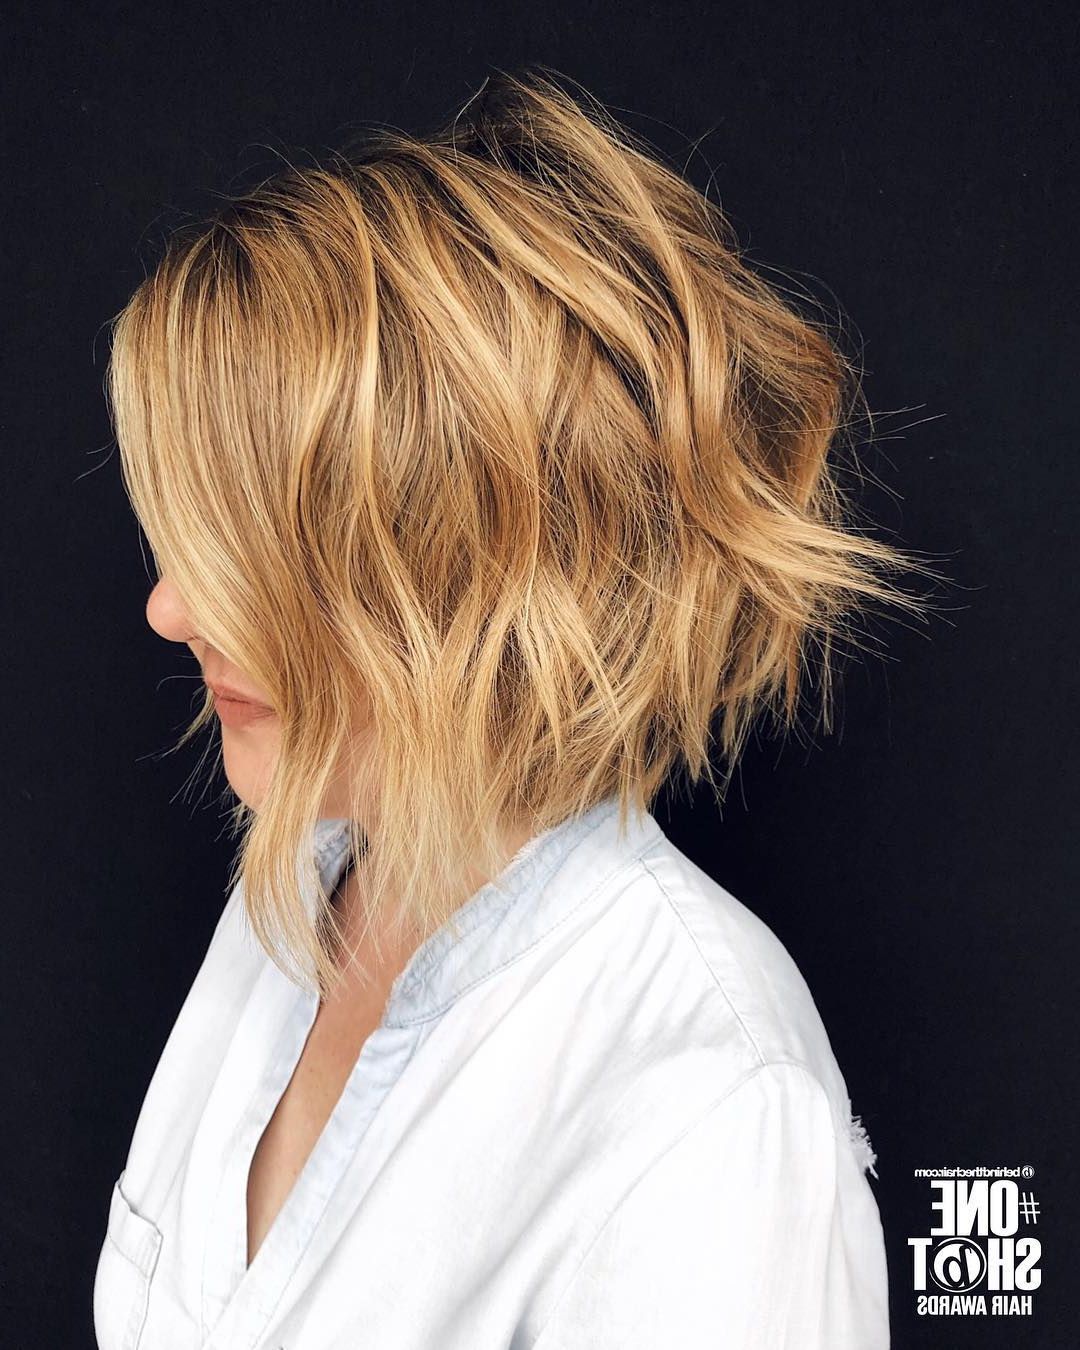 Top 10 Best Short Bob Hairstyles For Summer, Short Haircuts 2020 With Regard To Current Beach Wave Bob Hairstyles With Highlights (View 13 of 20)